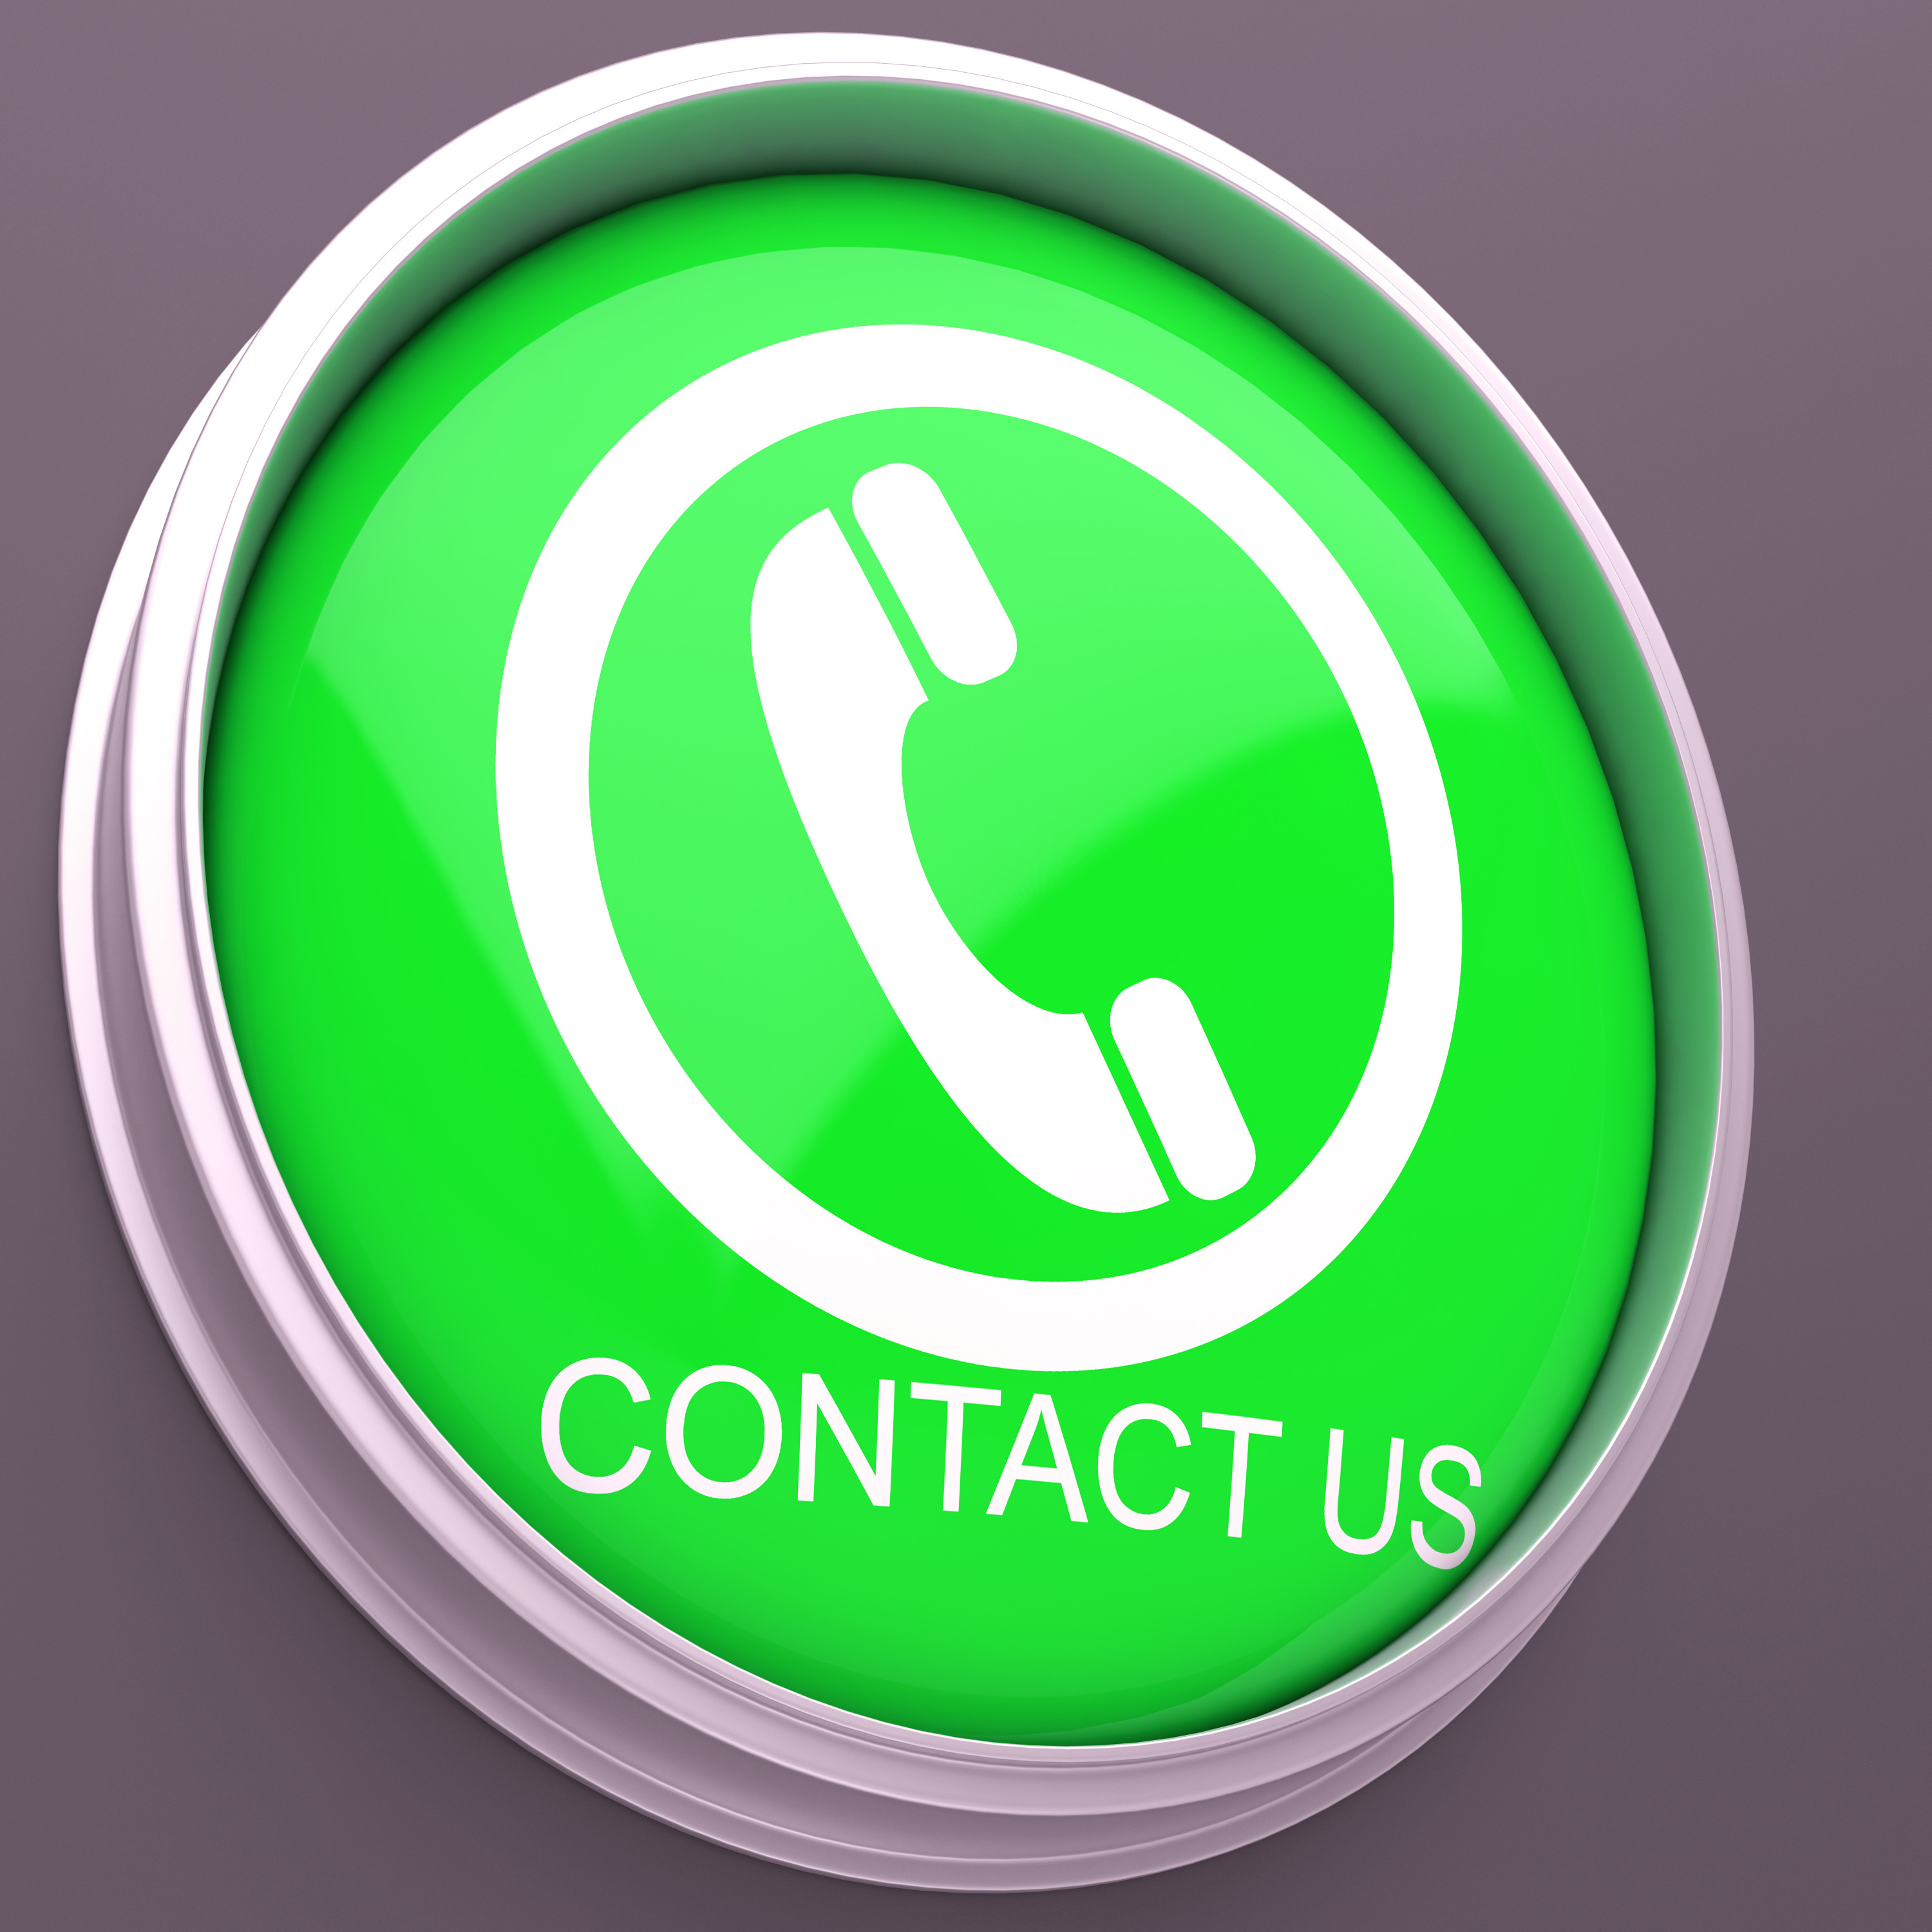 contact us button showing phone - not clickable